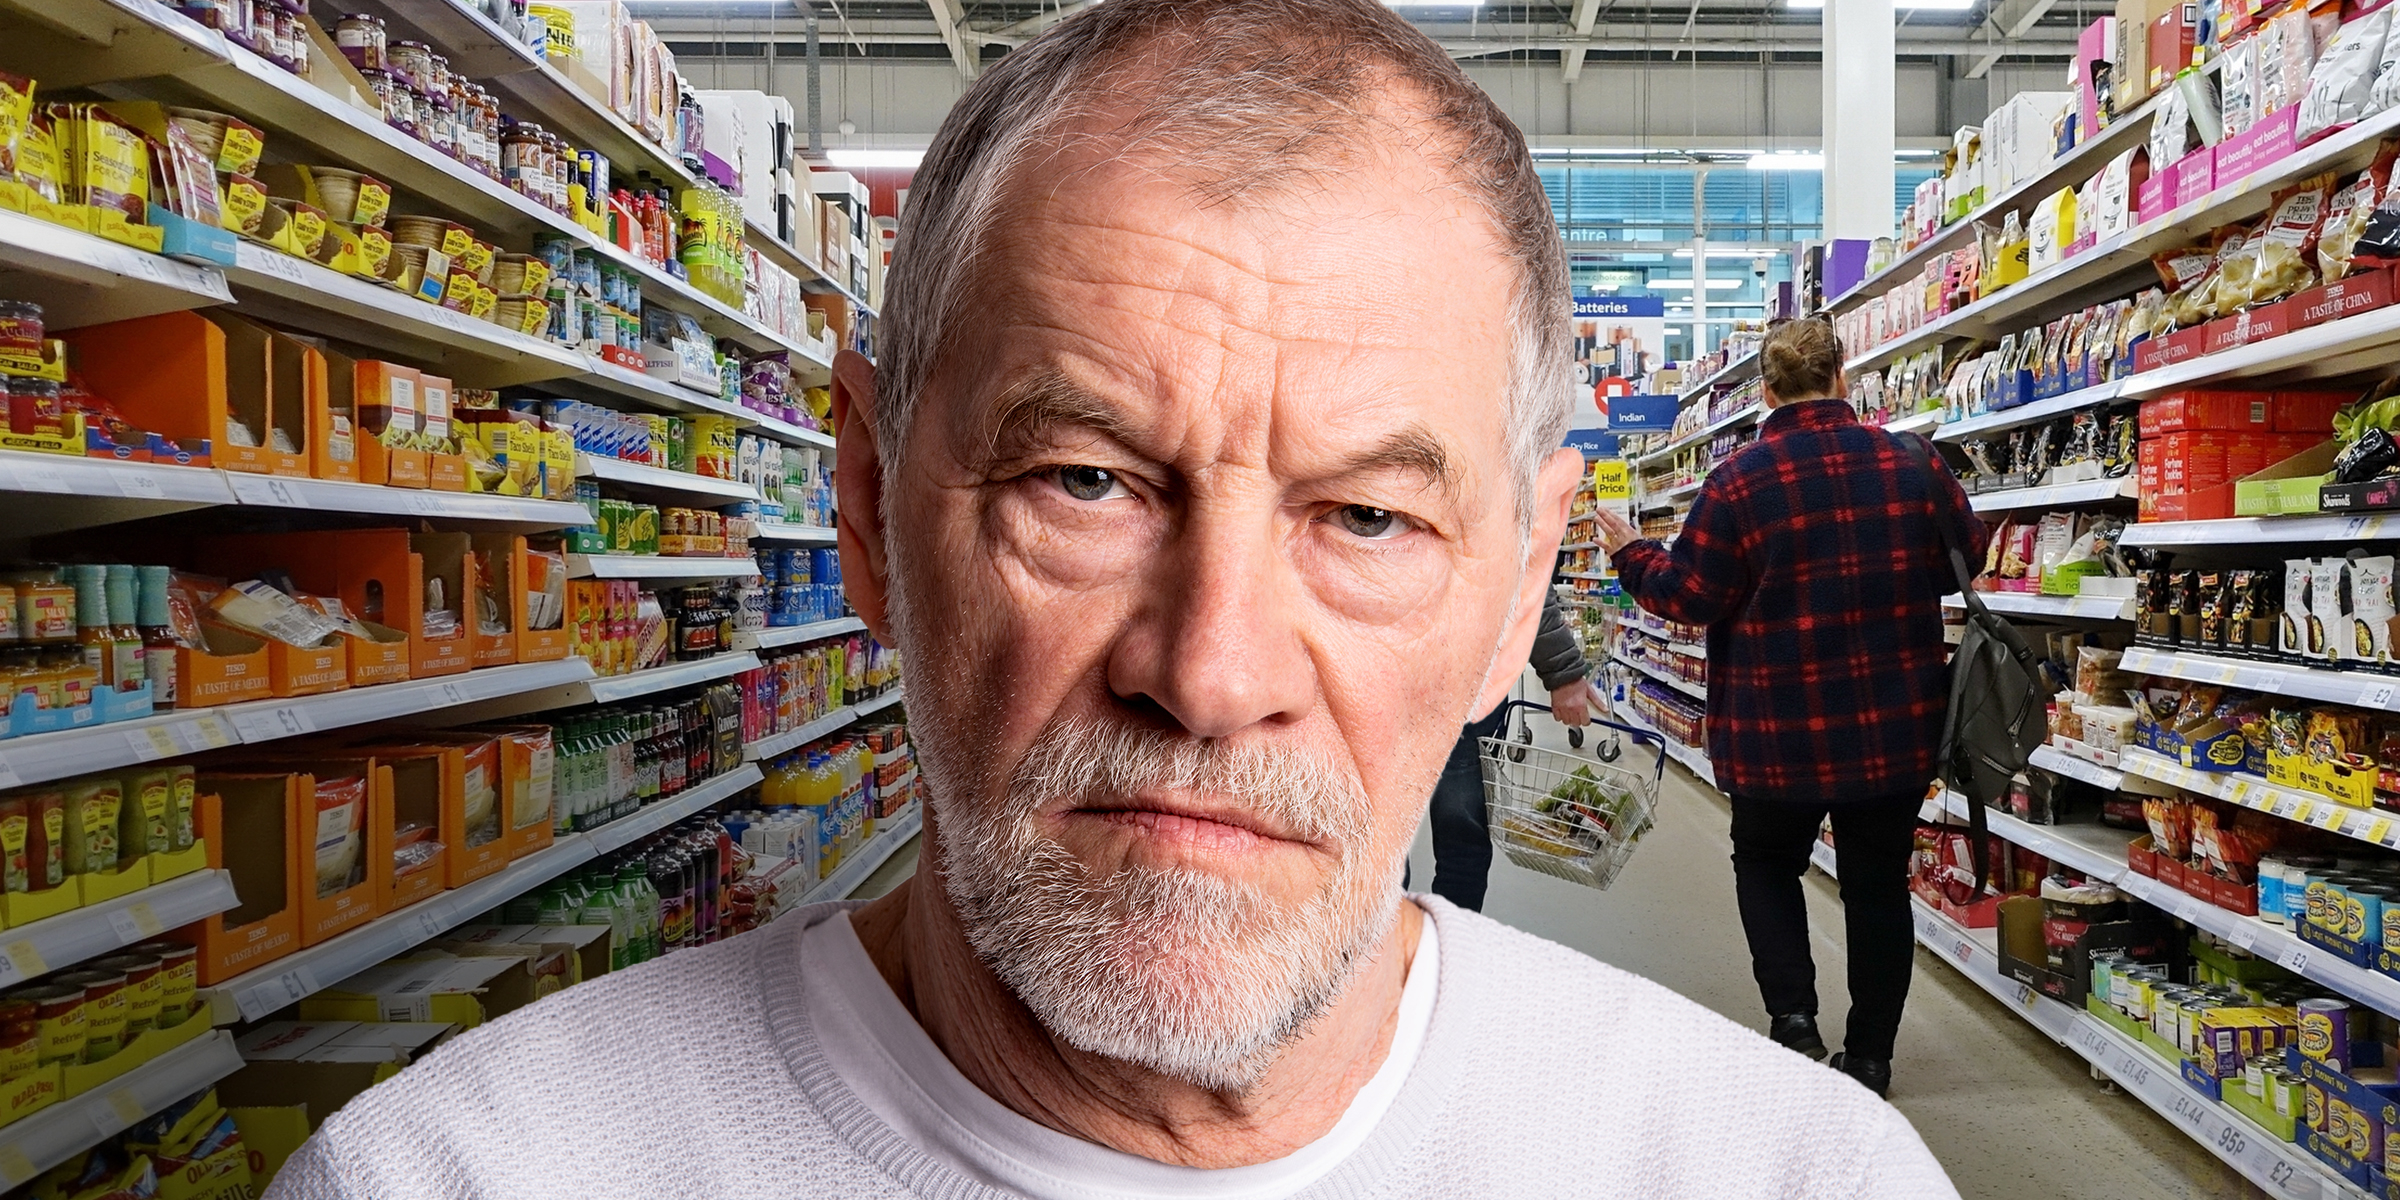 An angry man pictured in a department store | Source: Shutterstock